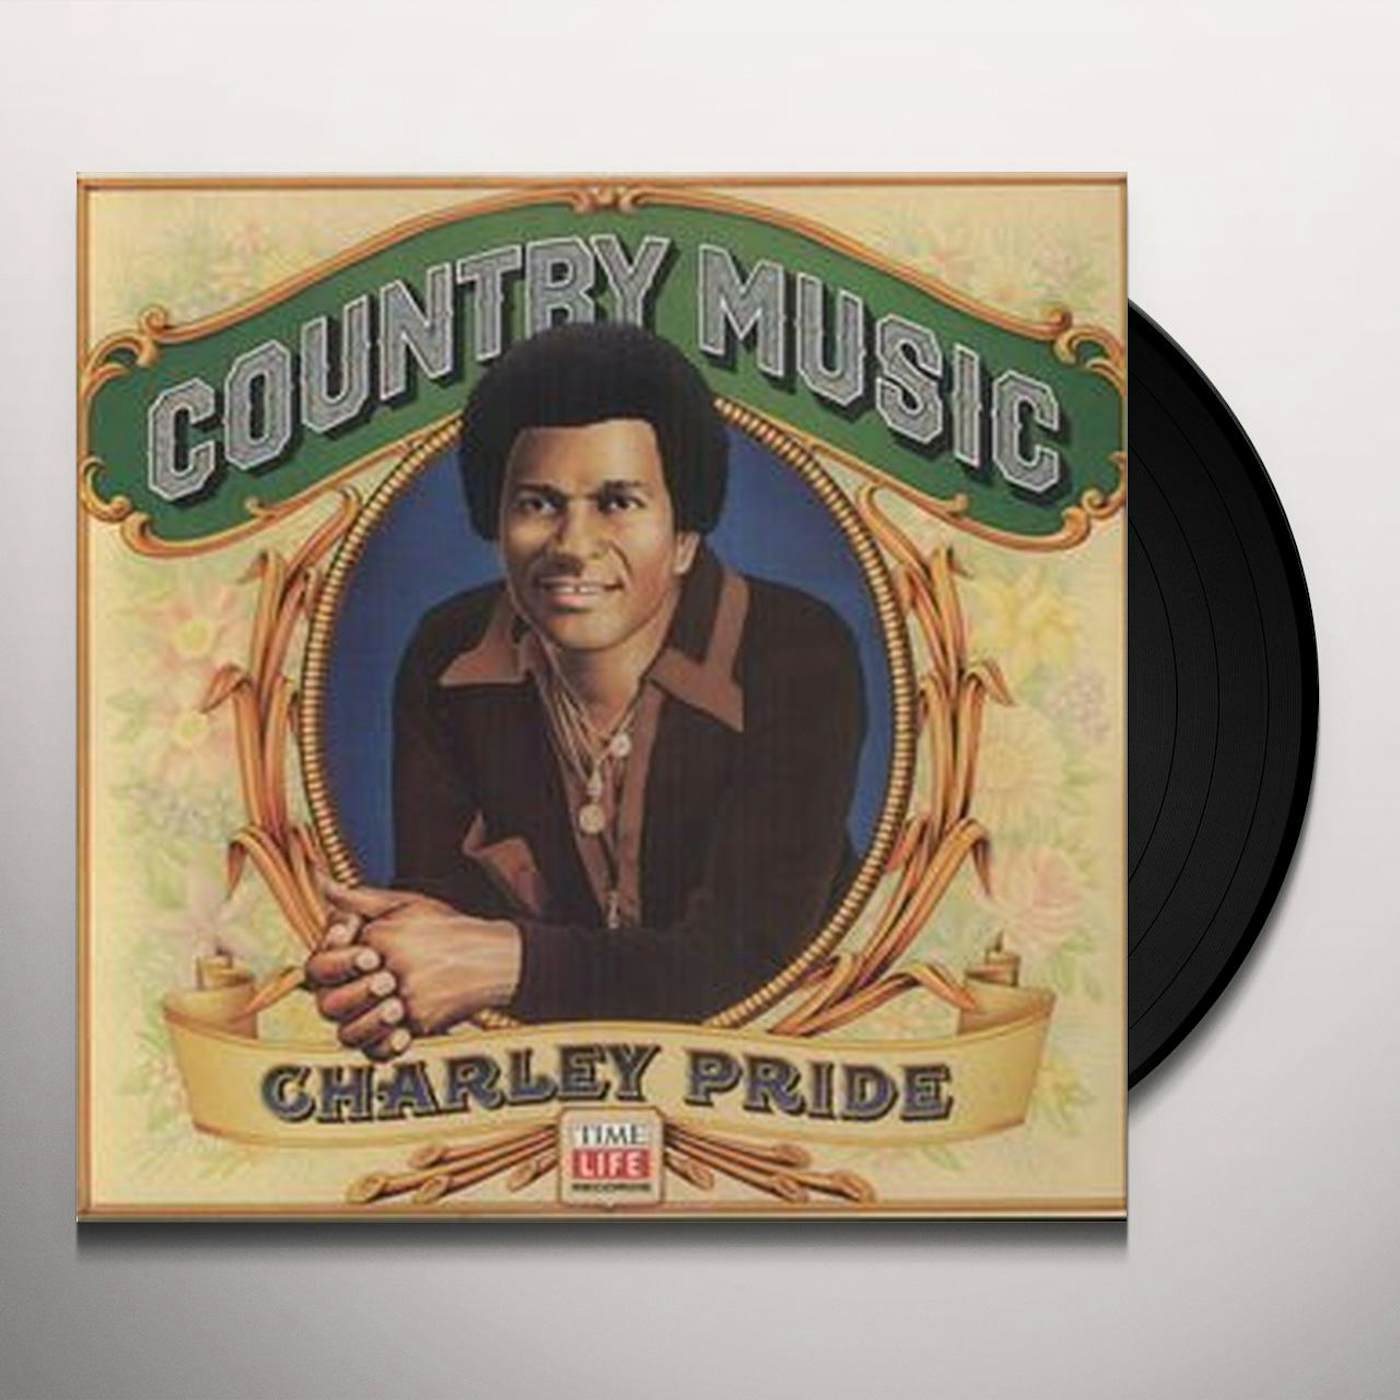 Charley Pride Country Music Vinyl Record